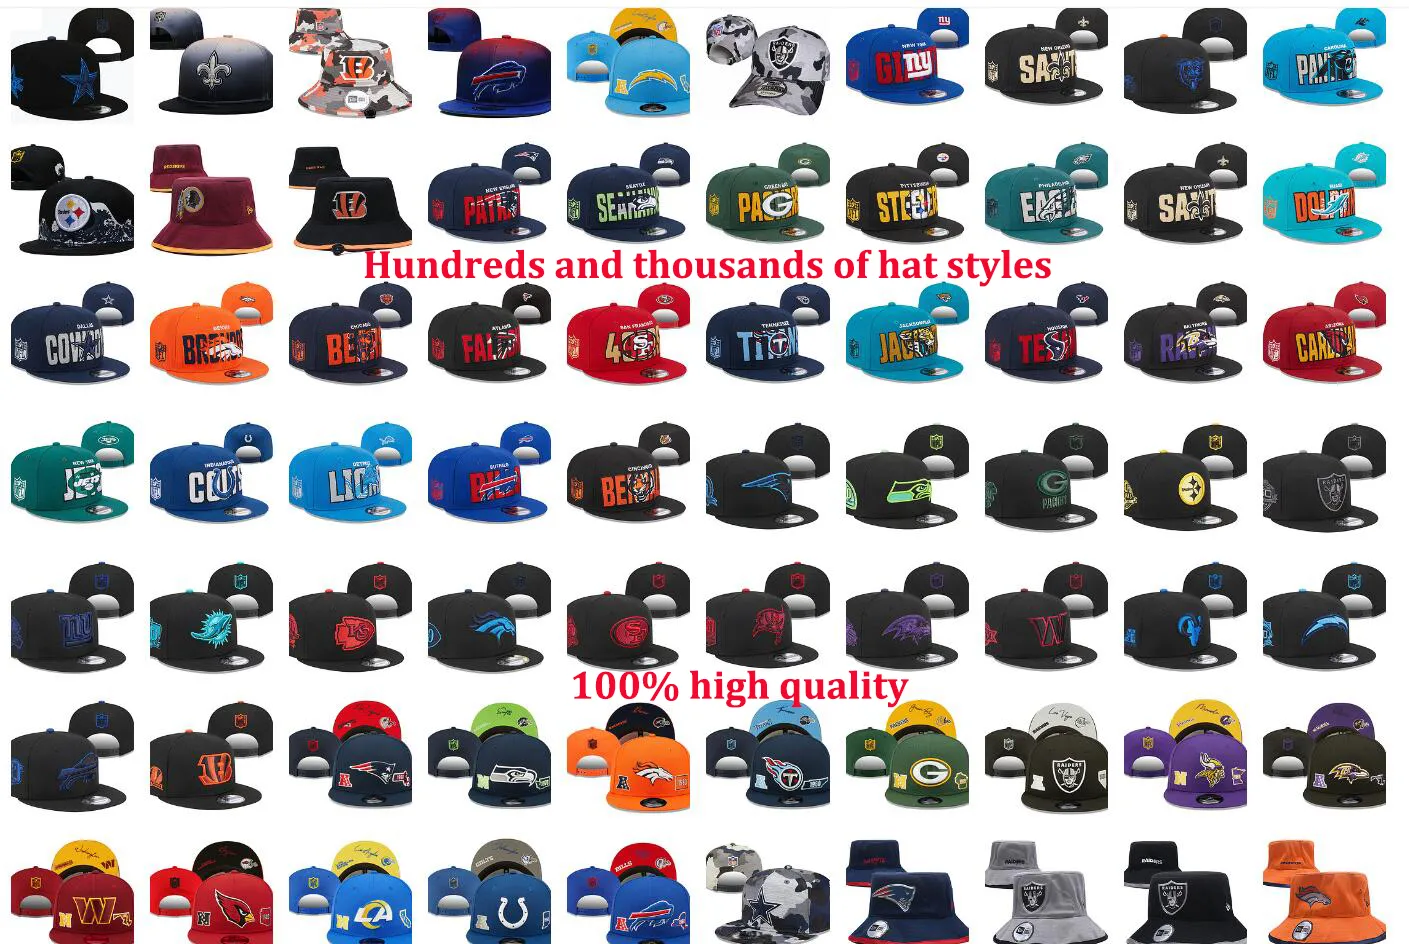 Trusted Top Quality Ball Beanies Globle Levered America Football Team Hatts Män Caps New Ankomst HotSeller Hat Factory